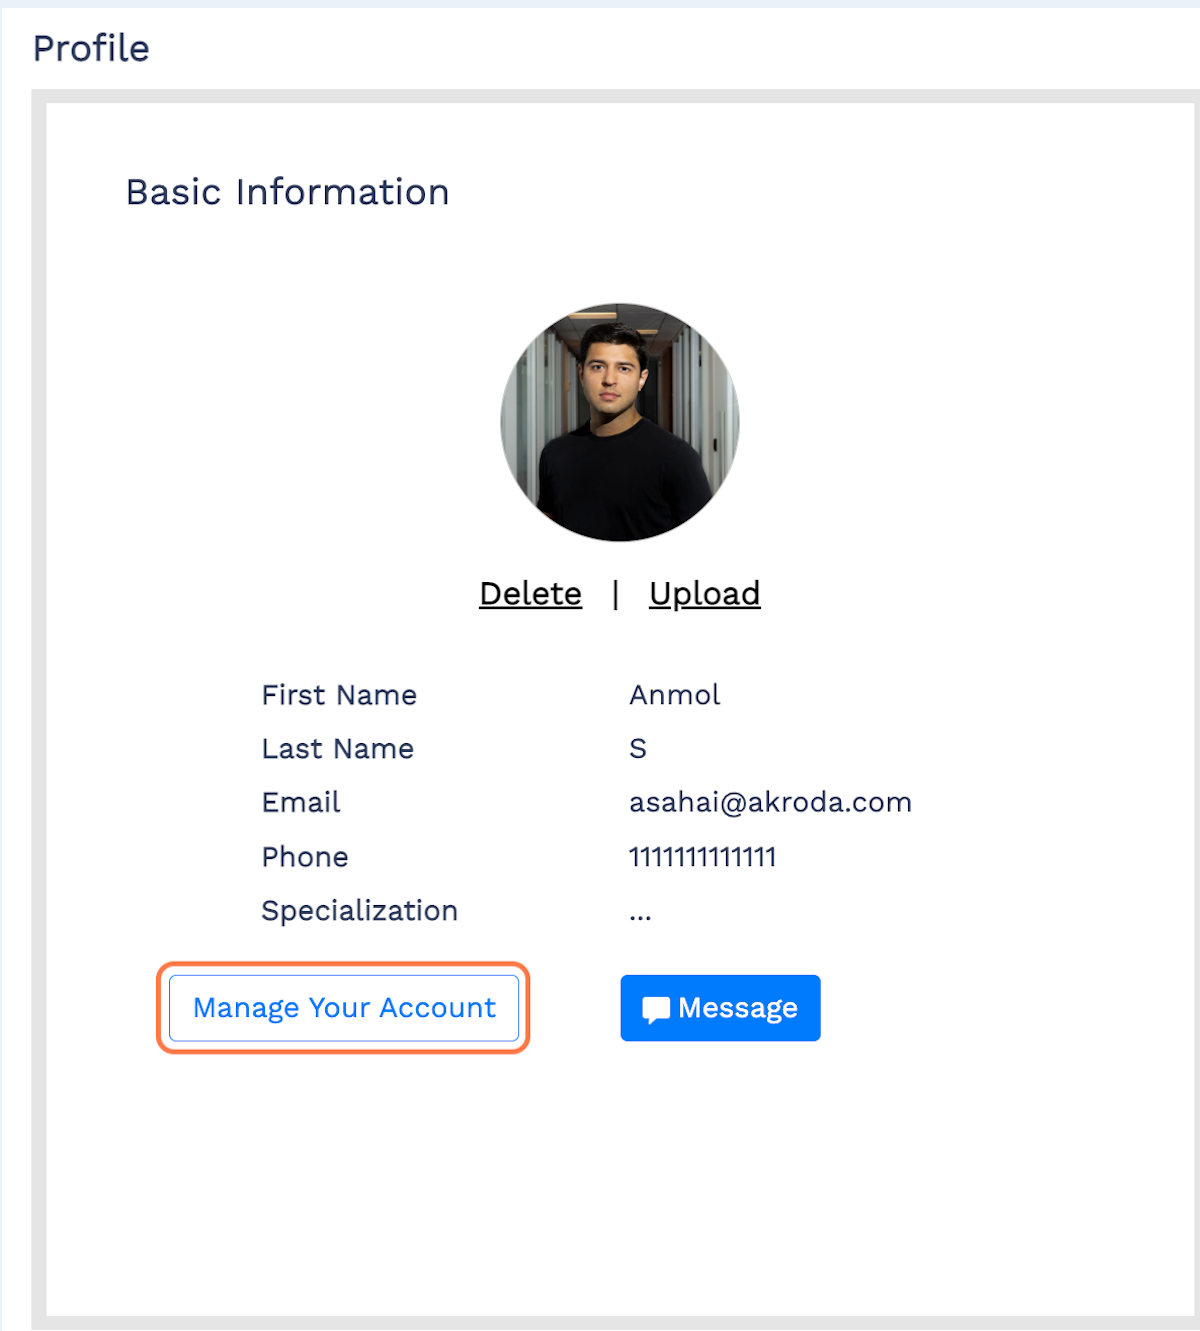 Click on Manage Your Account